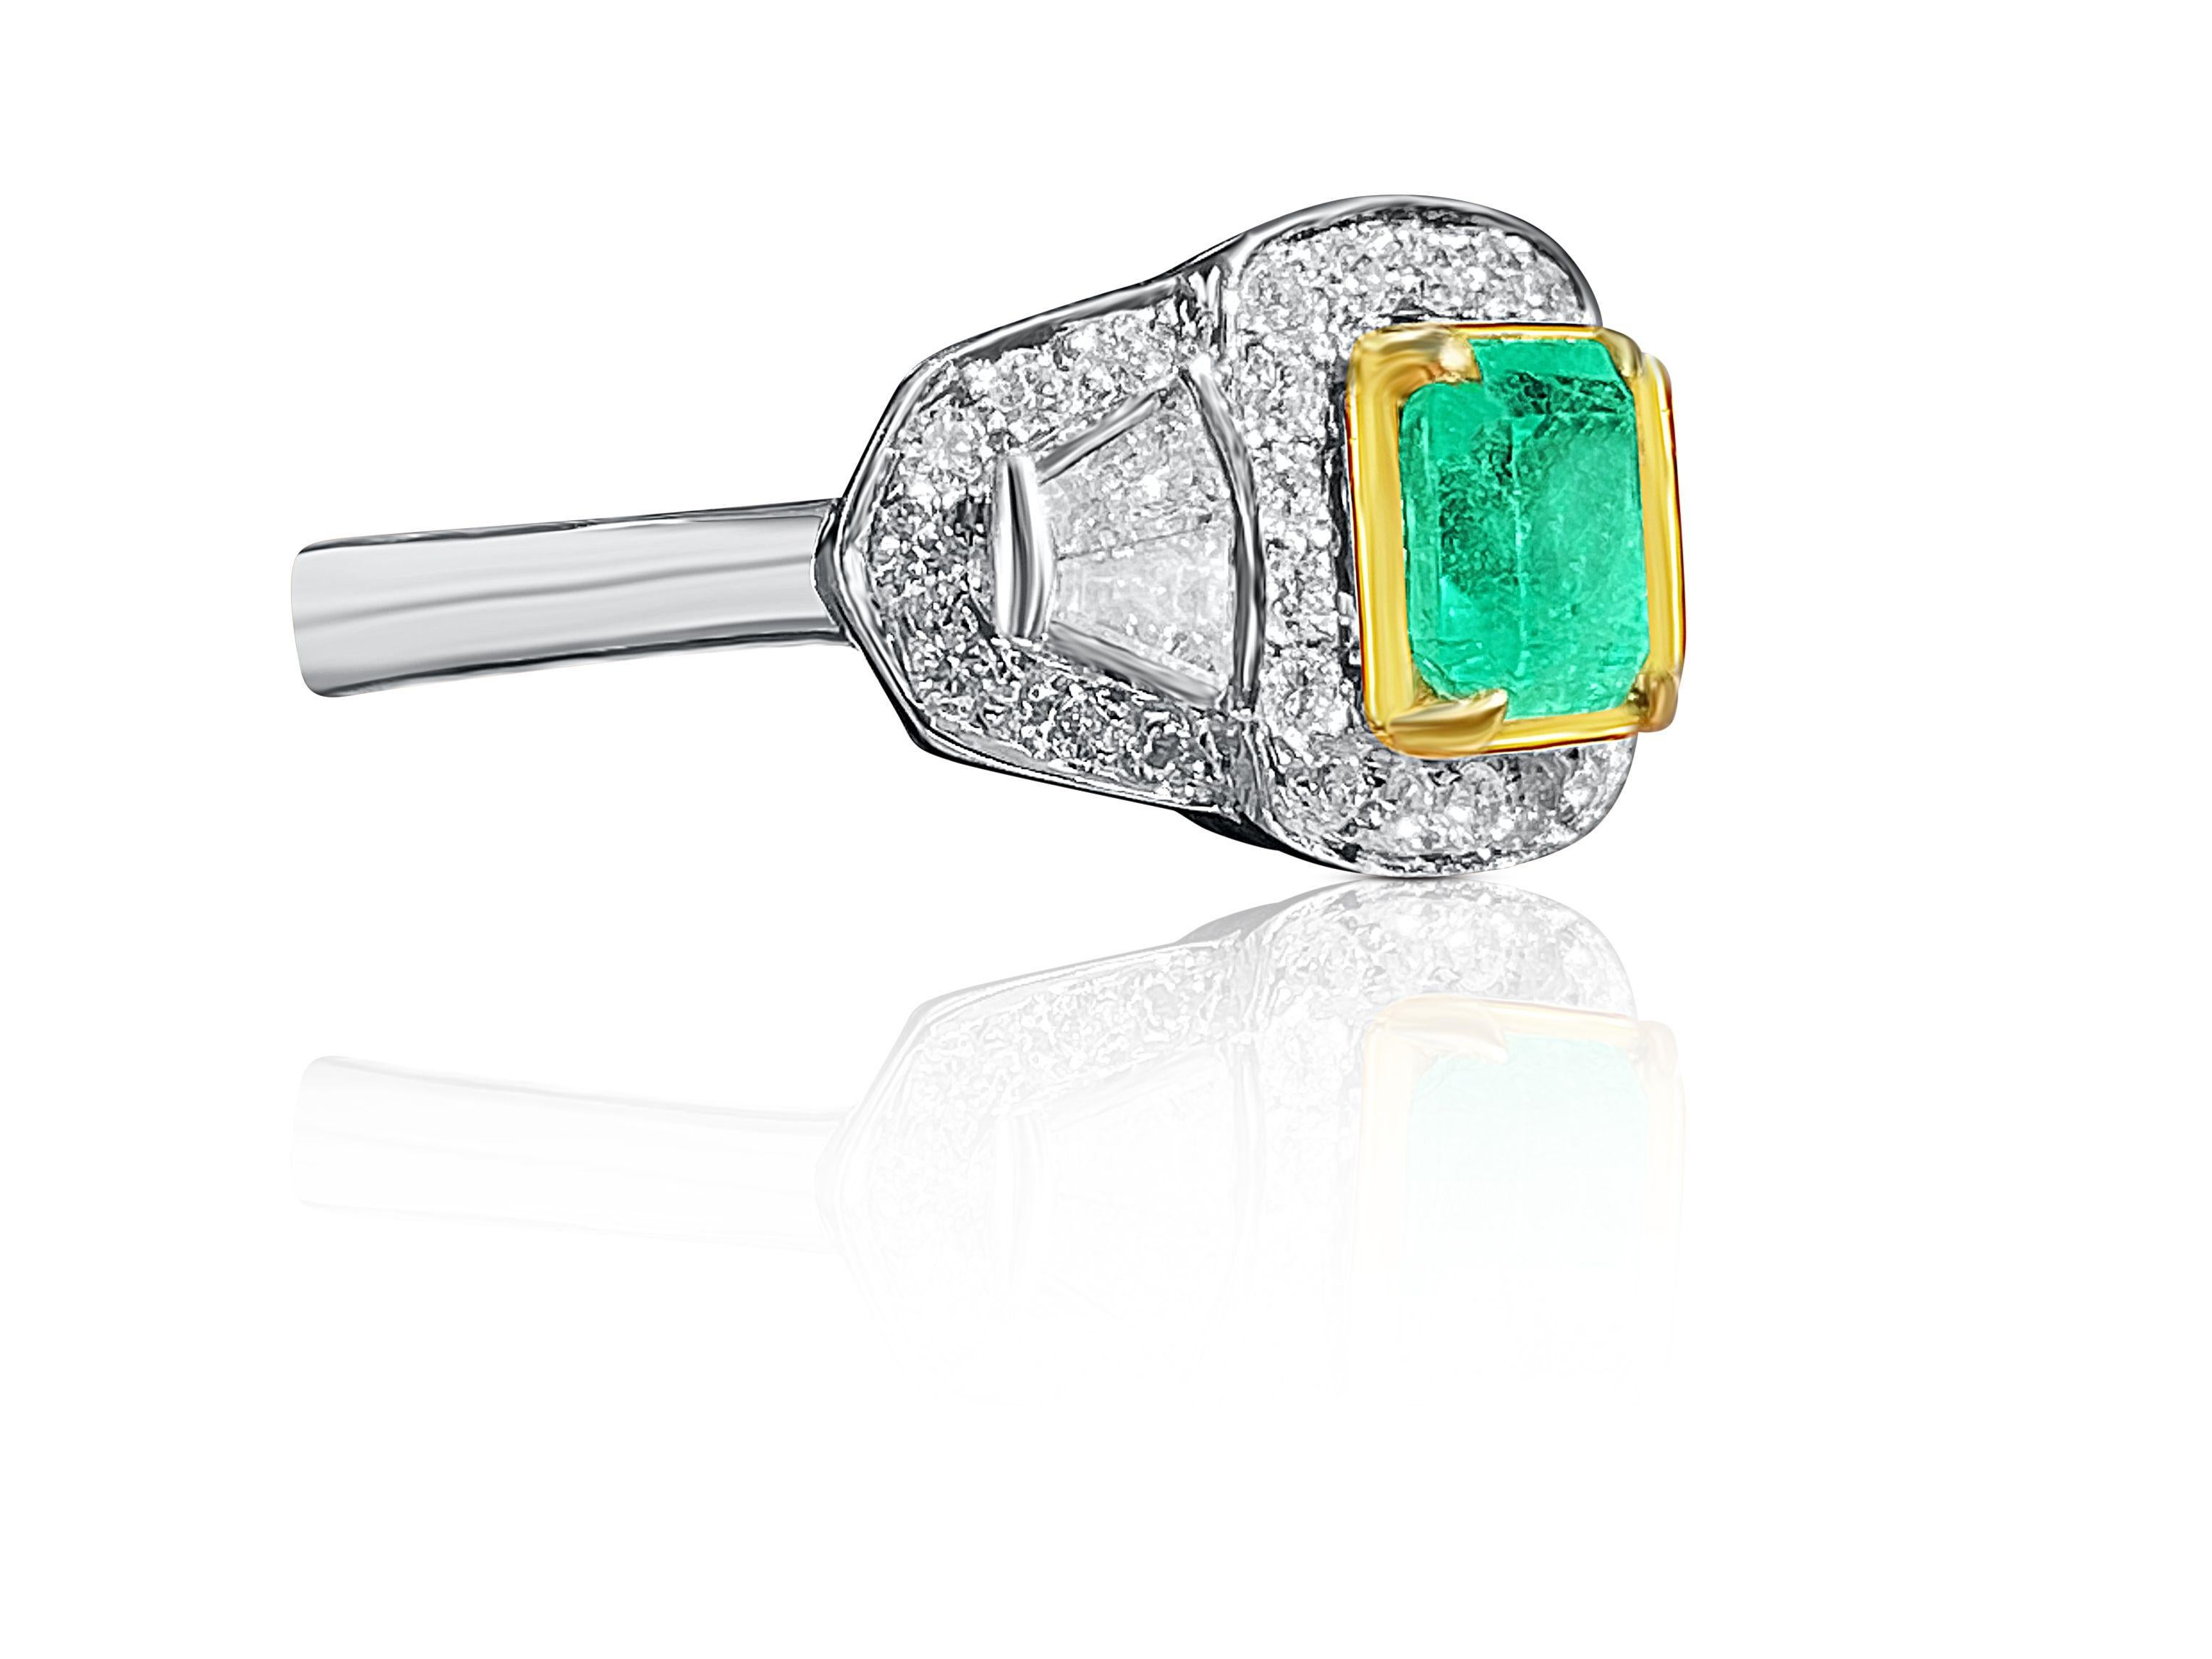 Centering a 0.94 carats Emerald-Cut Colombian Emerald, flanked by 0.30 carats of Baguette-Cut Diamonds, further accented by an additional 0.64 carats of Round-Brilliant Cut Diamonds, and set in 18K White/Yellow Gold.

Details:
✔ Stone: Emerald
✔